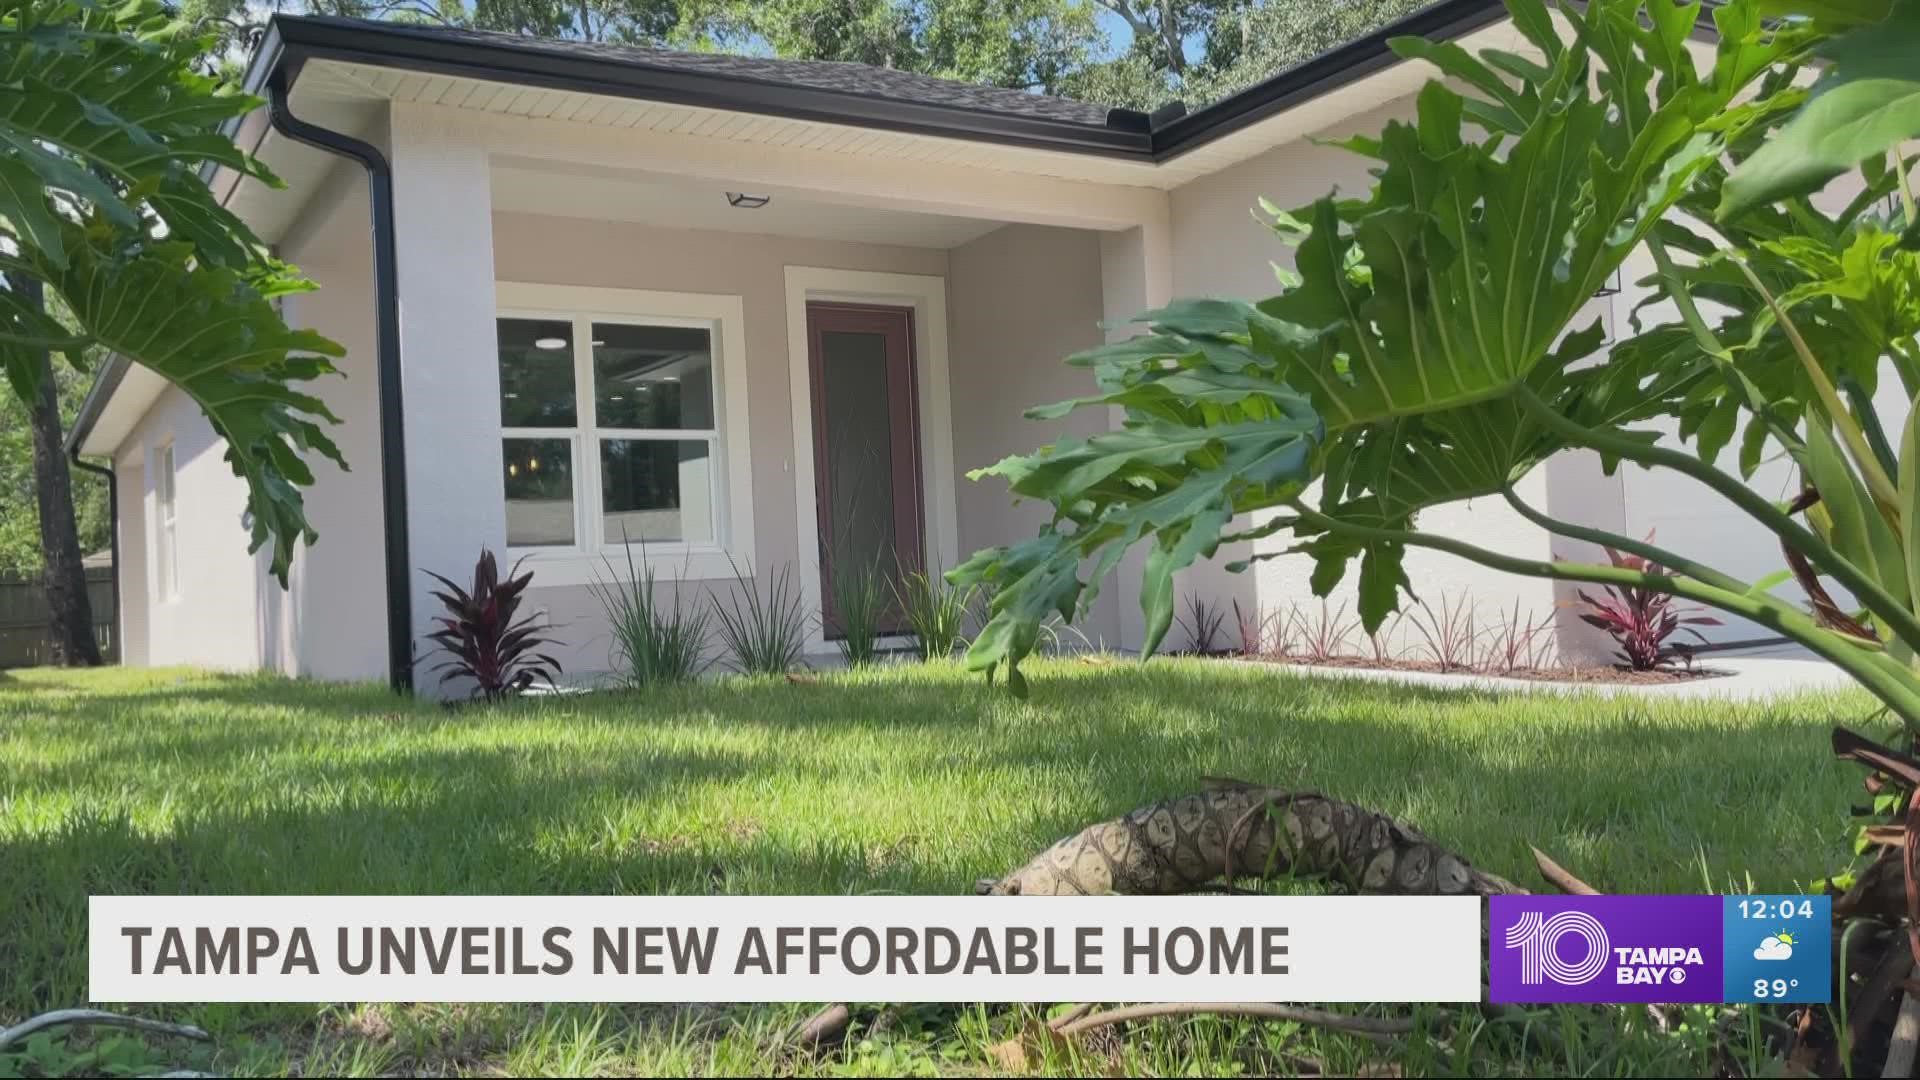 The first of 17 affordable homes is ready to welcome homeowners.